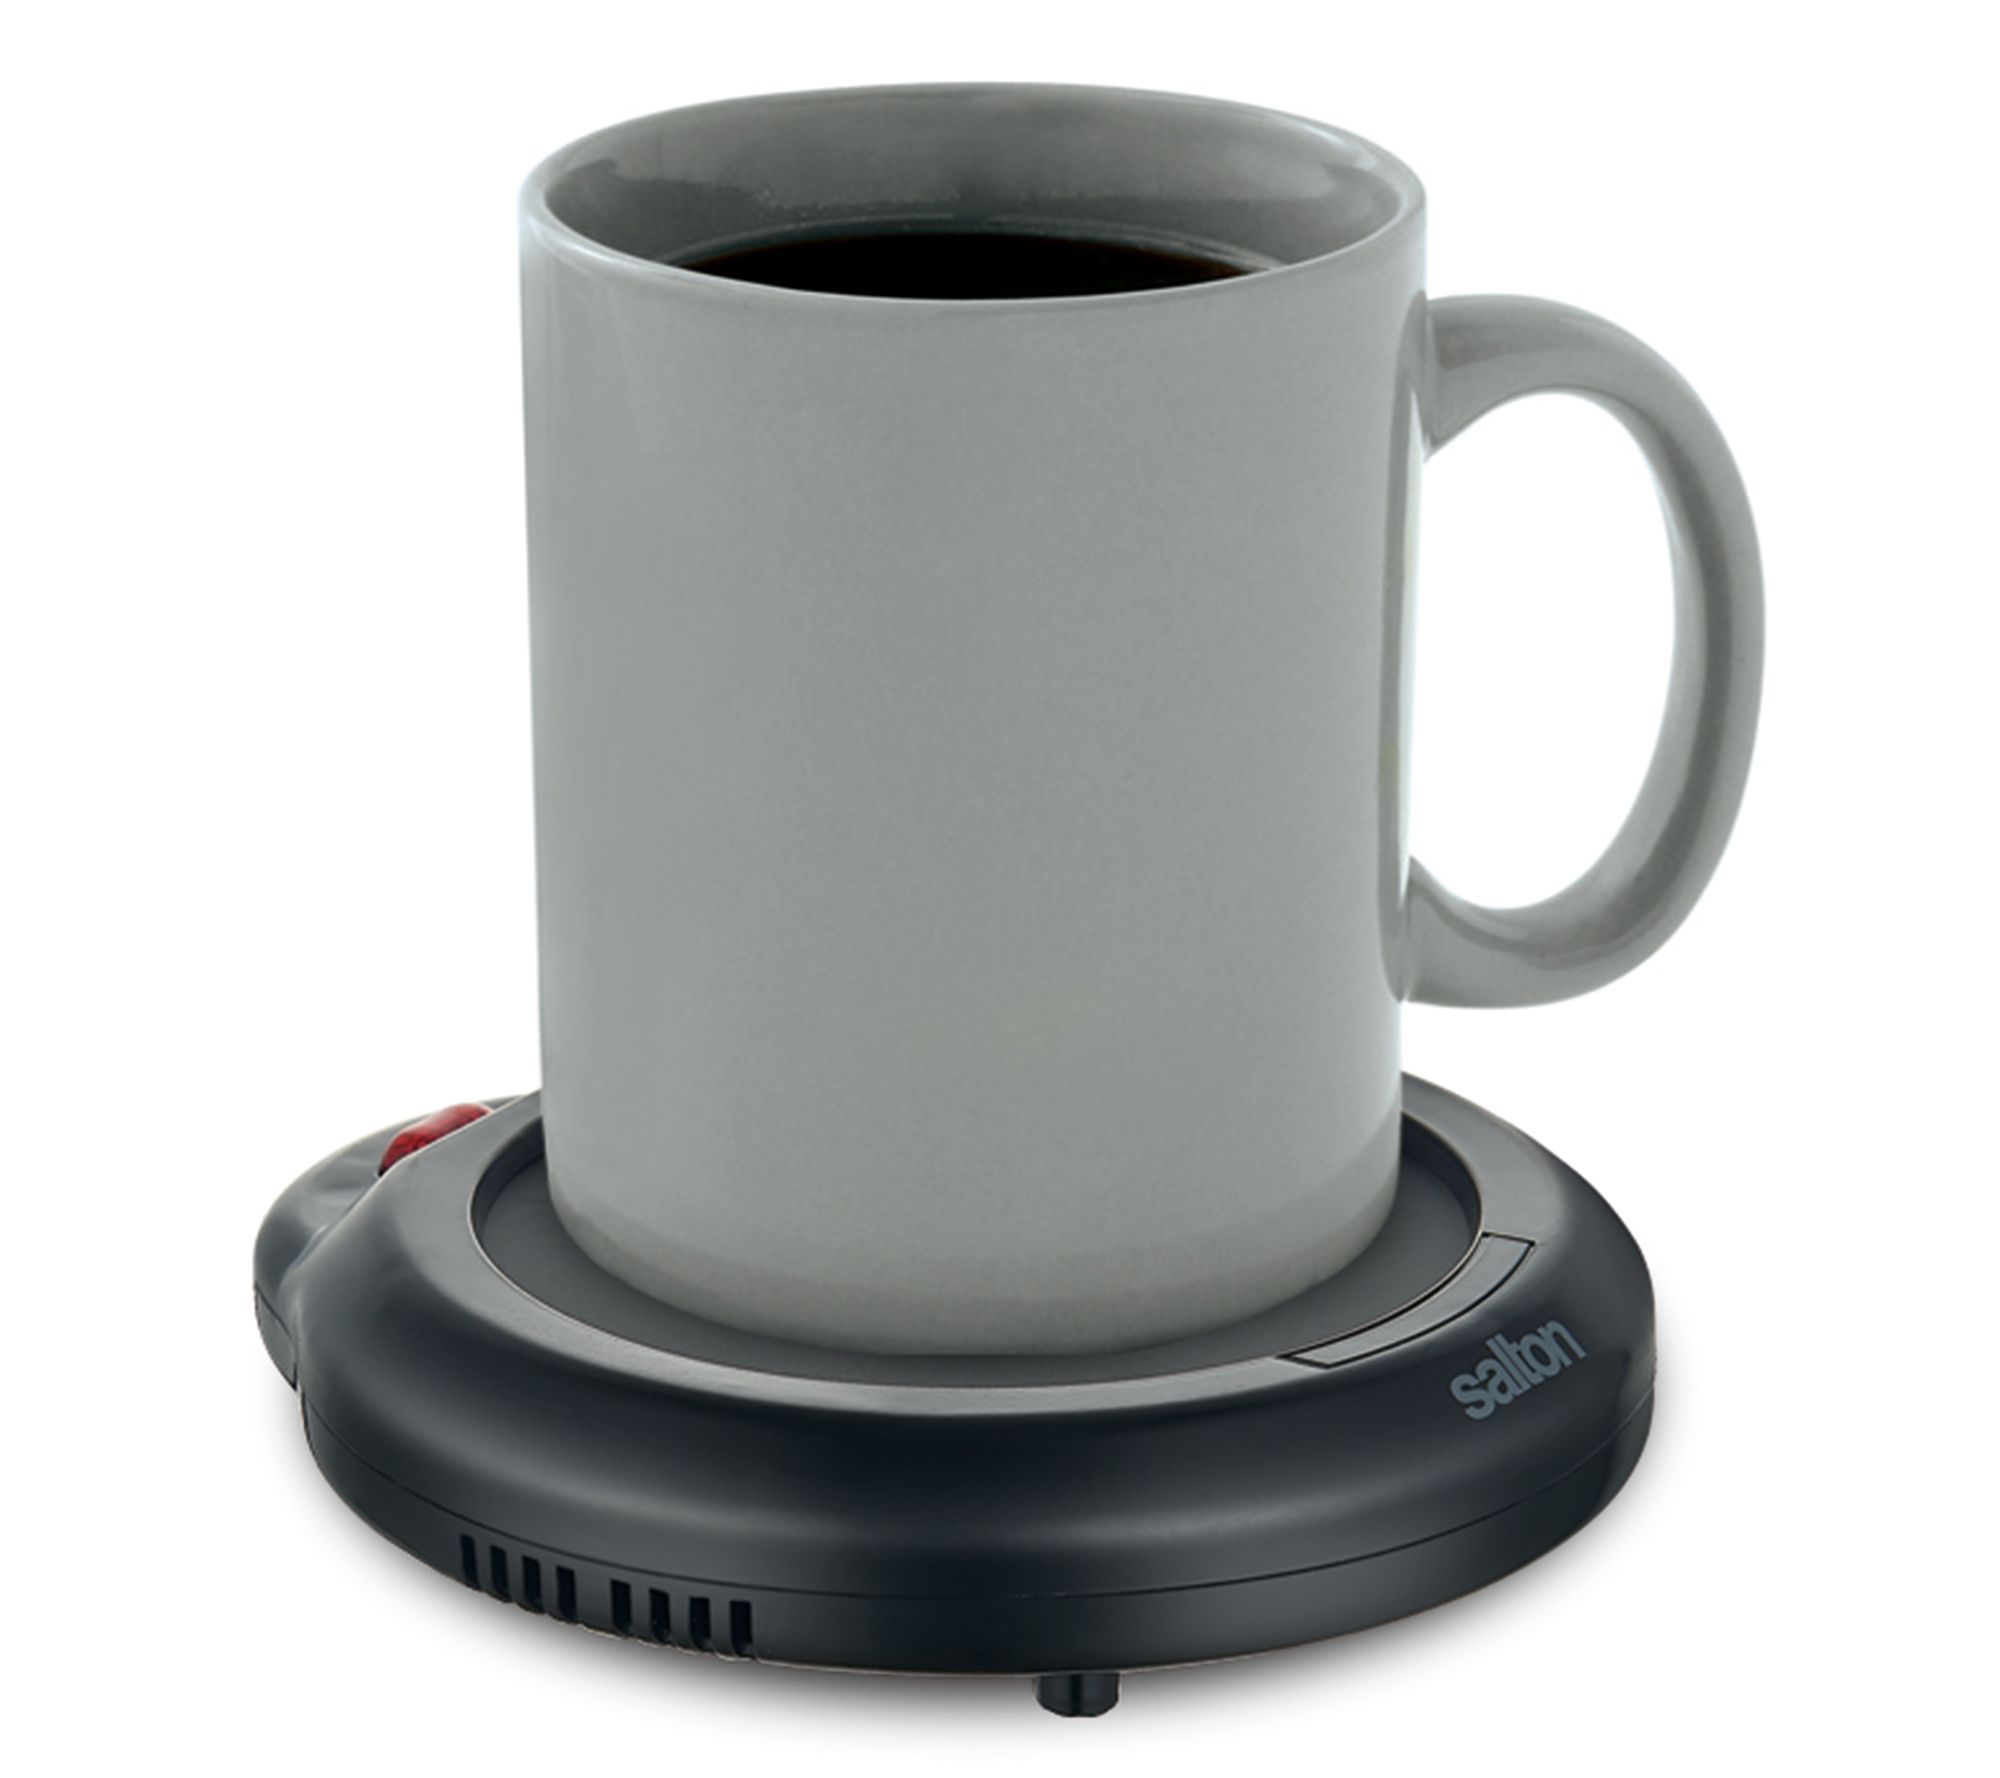  Mr. Coffee Mug Warmer for Coffee and Tea, Portable Cup Warmer  for Travel, Office Desks, and Home, Black